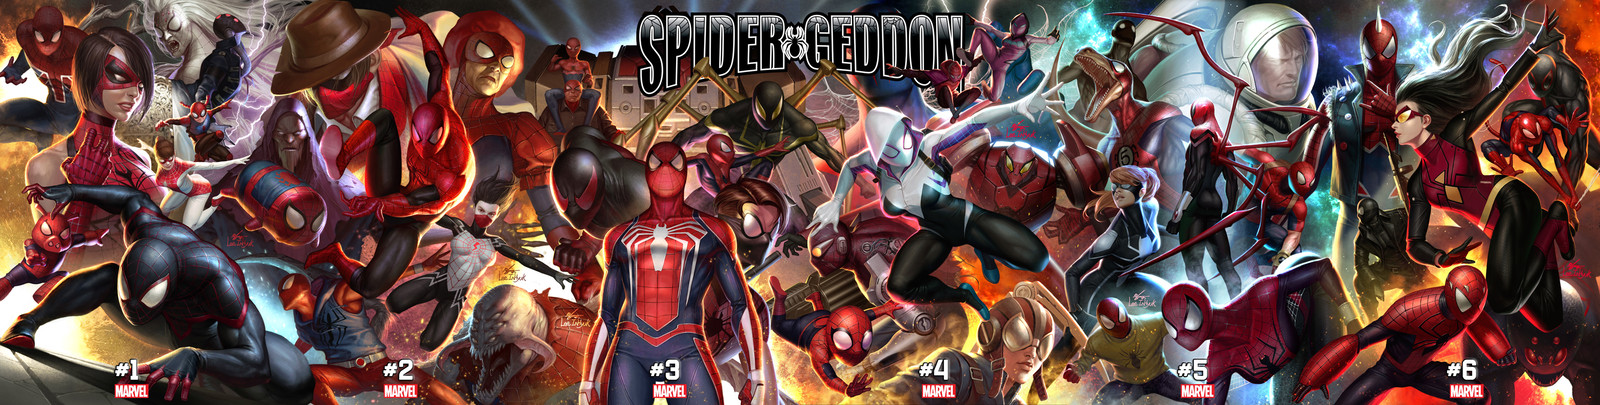 Spider-Geddon Connecting Cover Finish